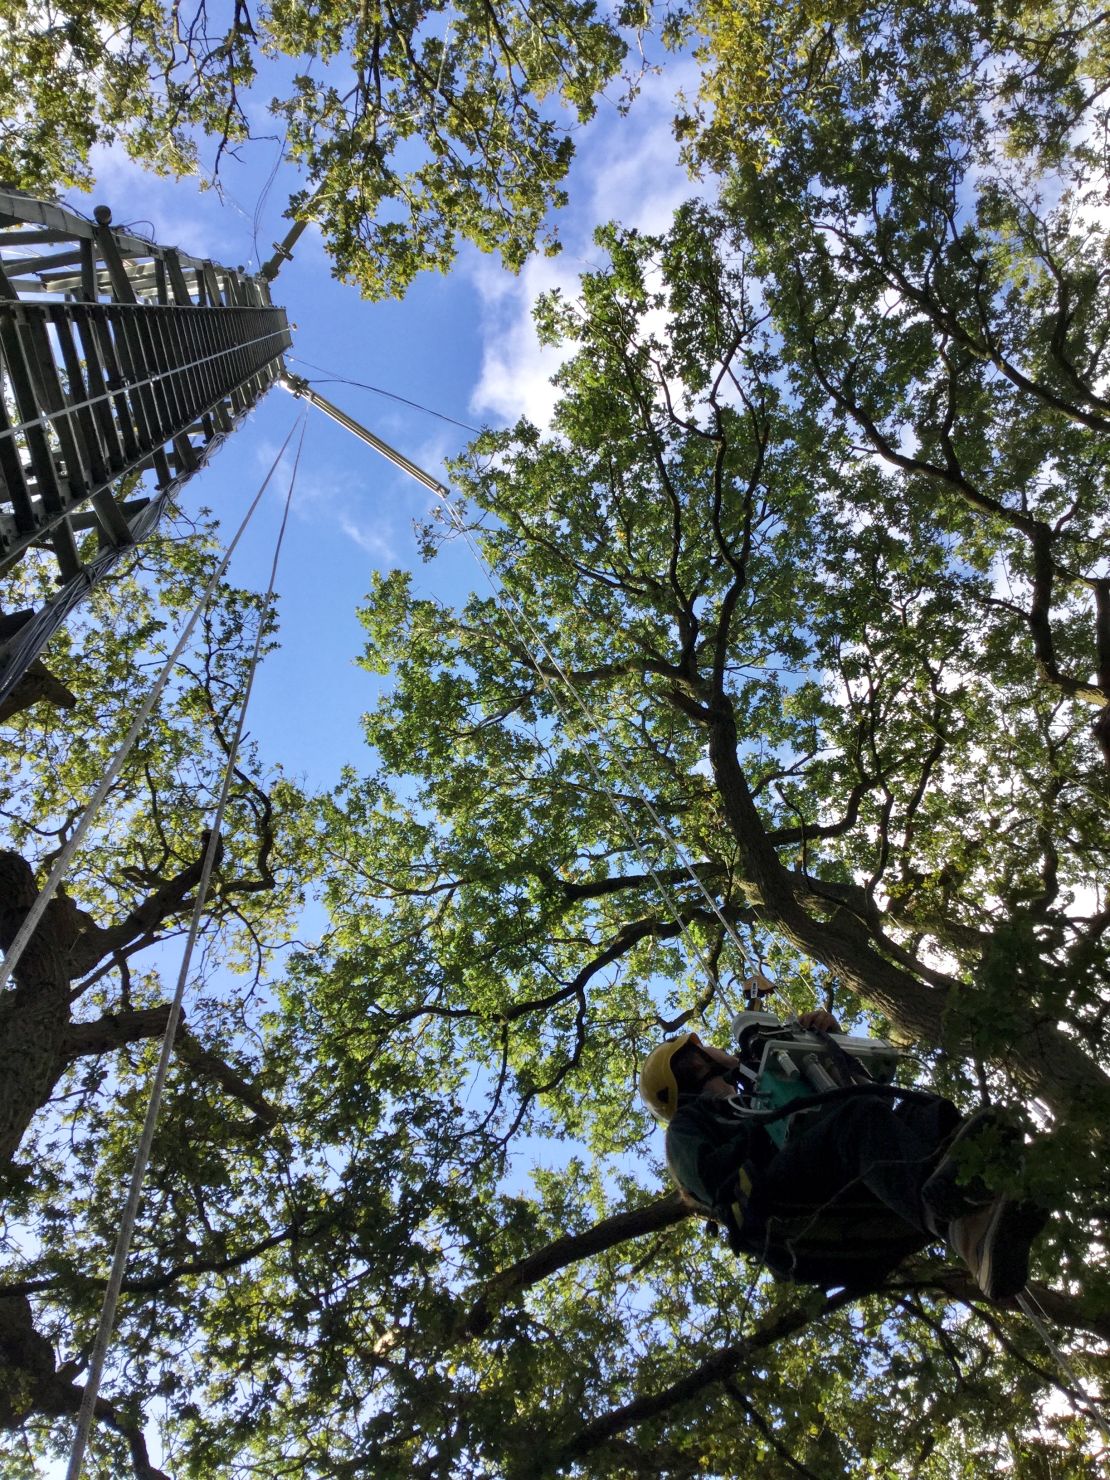 Looking up into the canopy of a mature forest during the BIFoR fieldwork research.